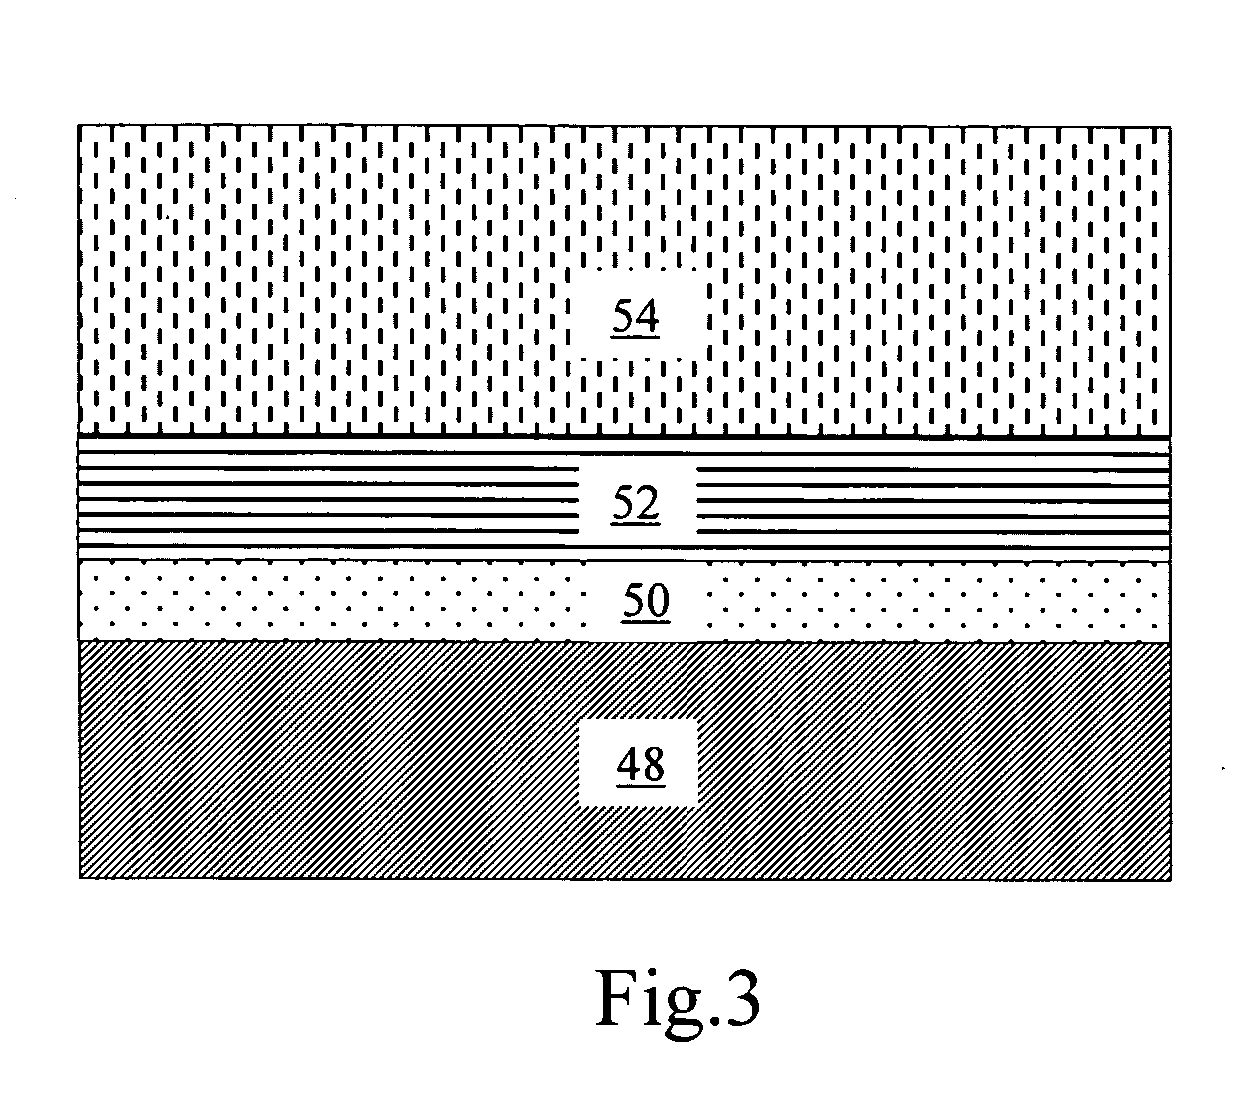 Process for depositing composite coating on a surface